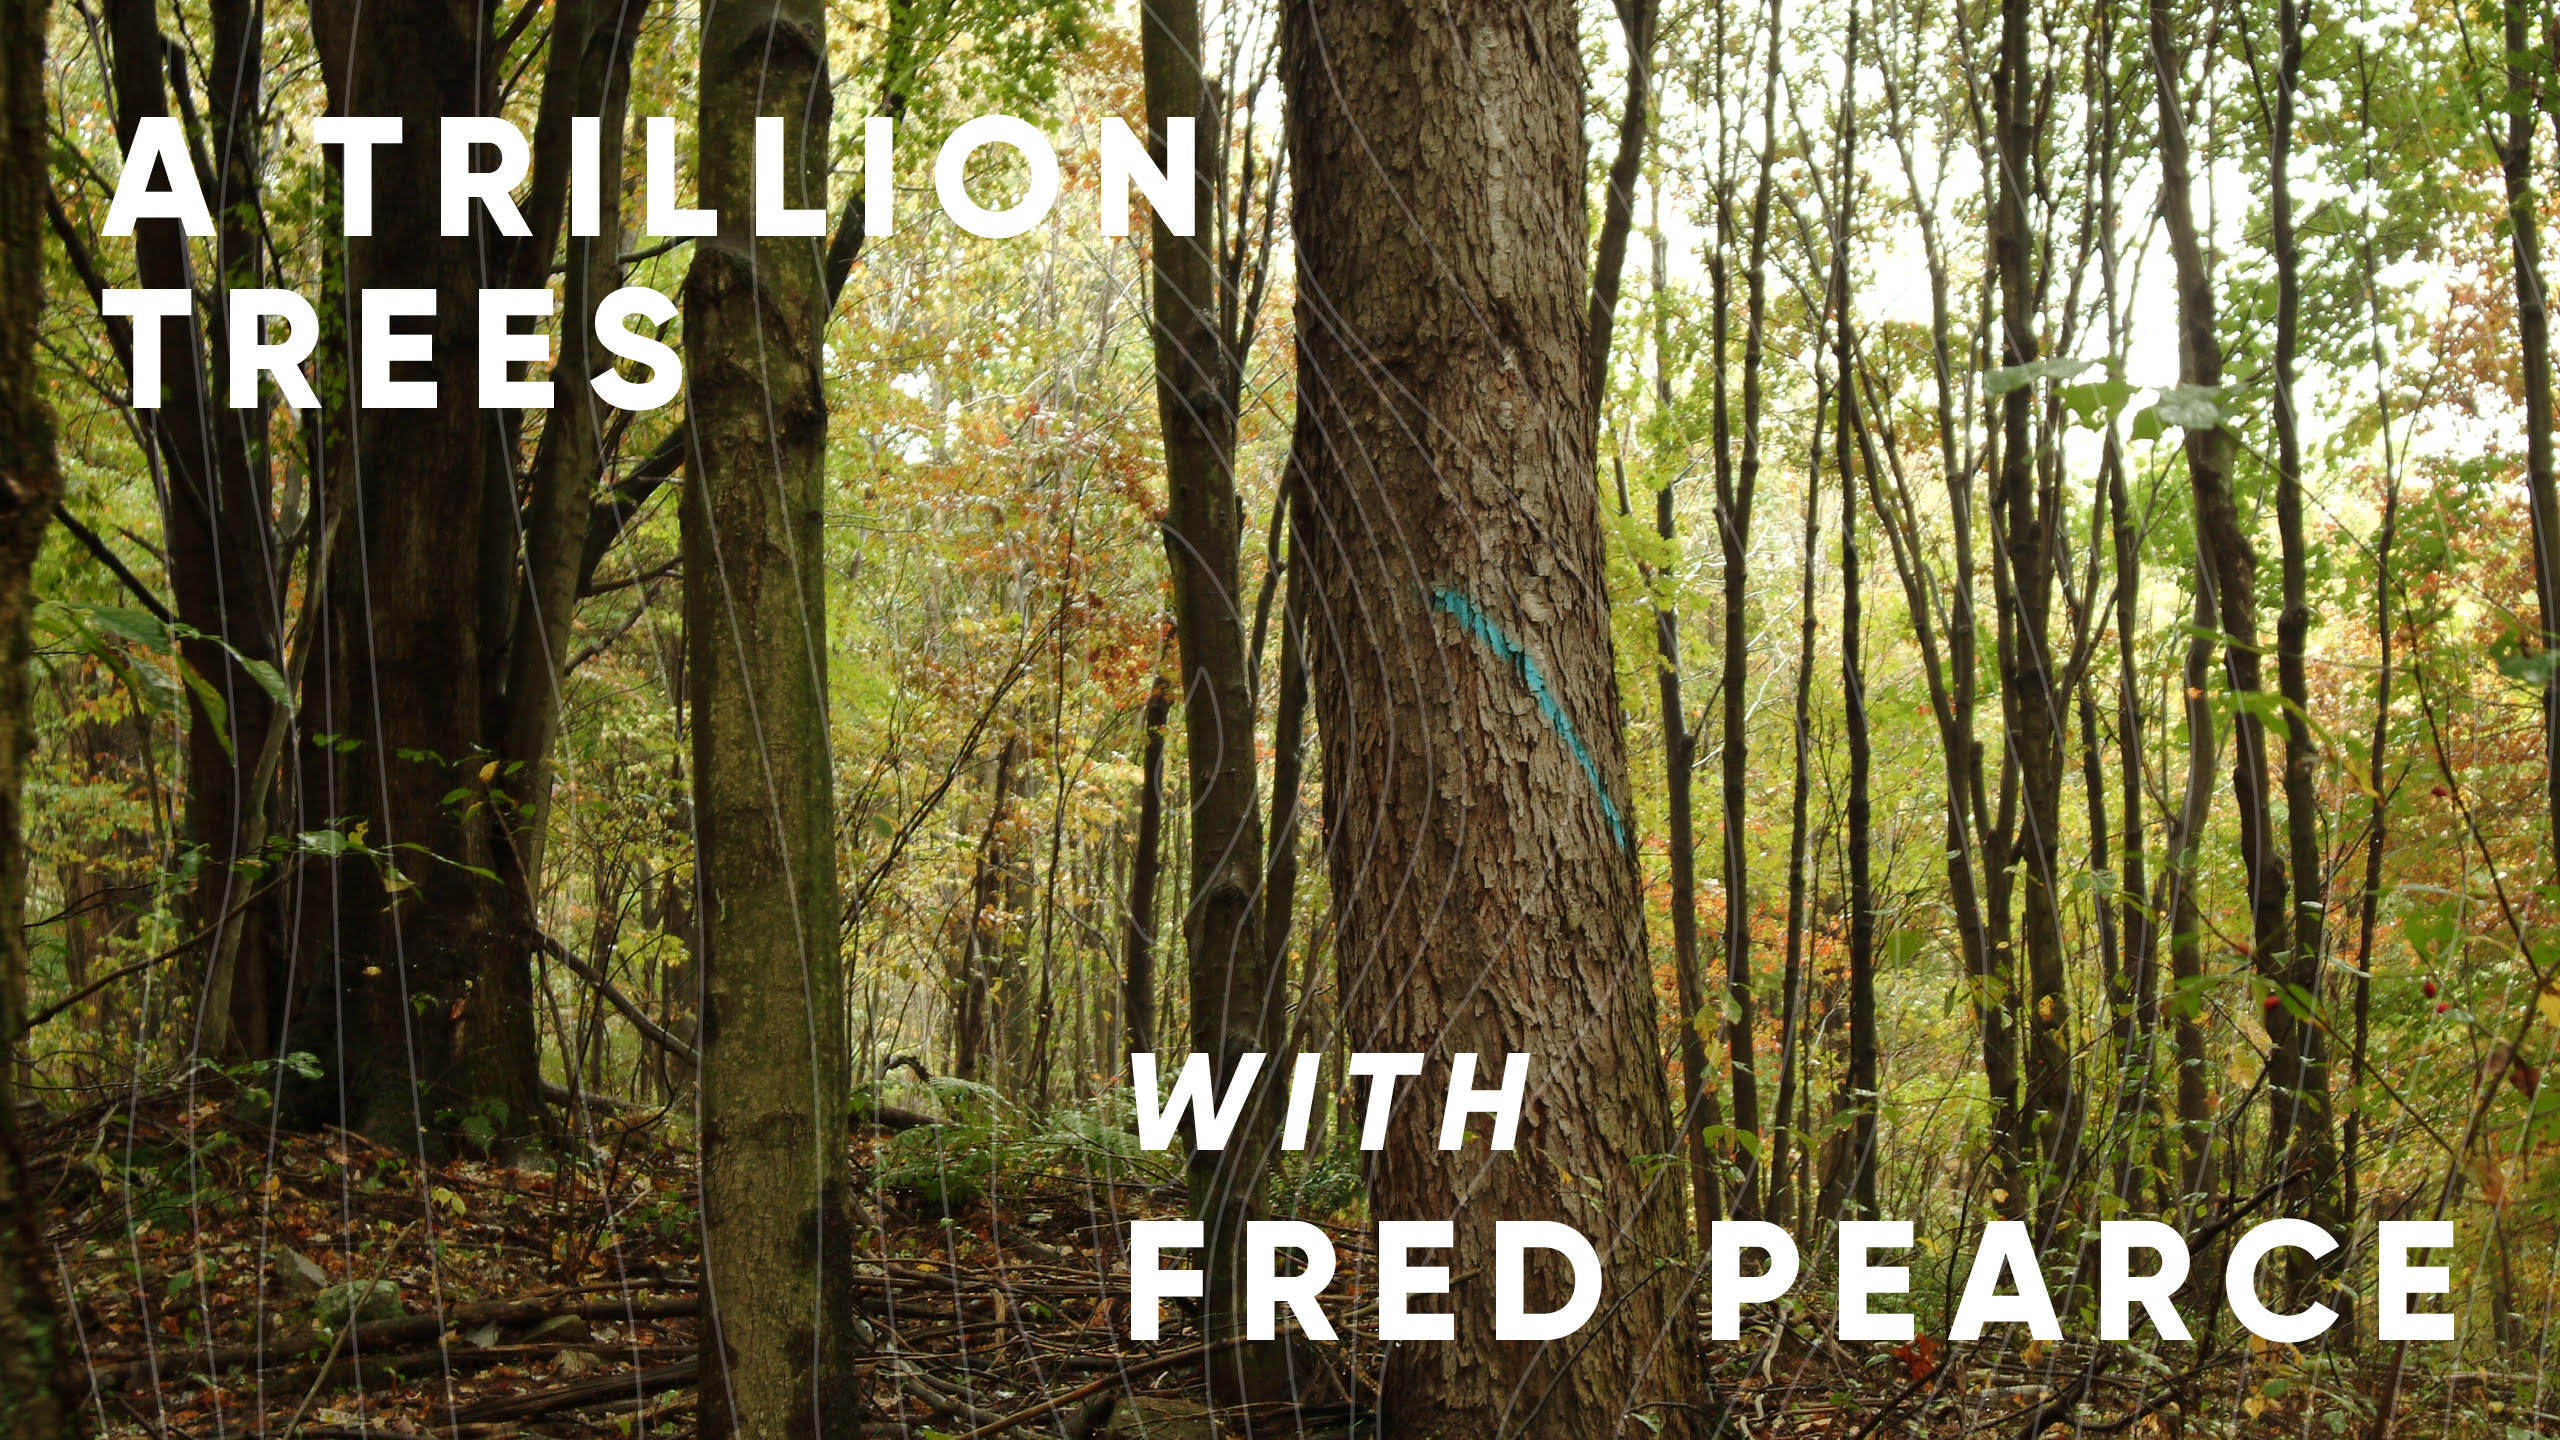 A Trillion Trees with Fred Pearce